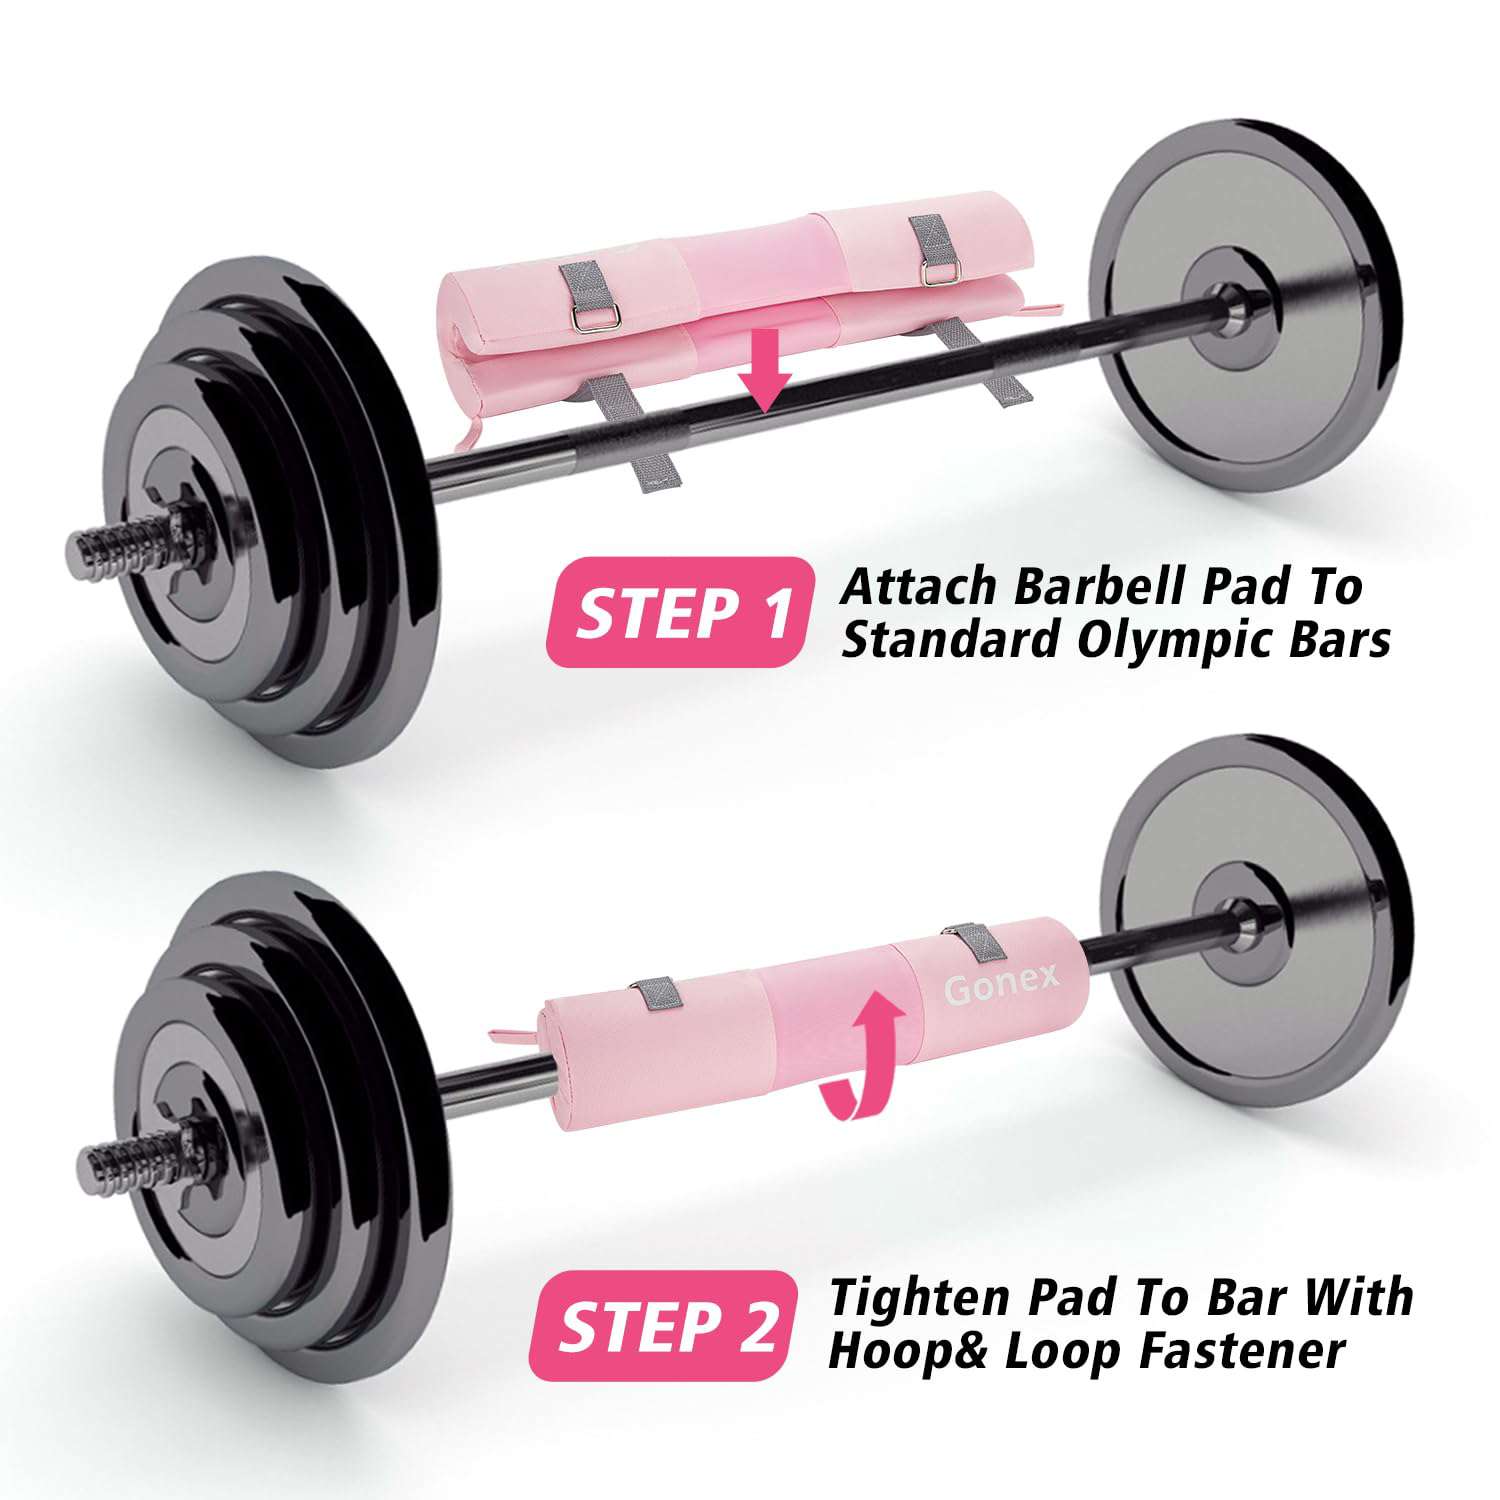 How to use barbell pad